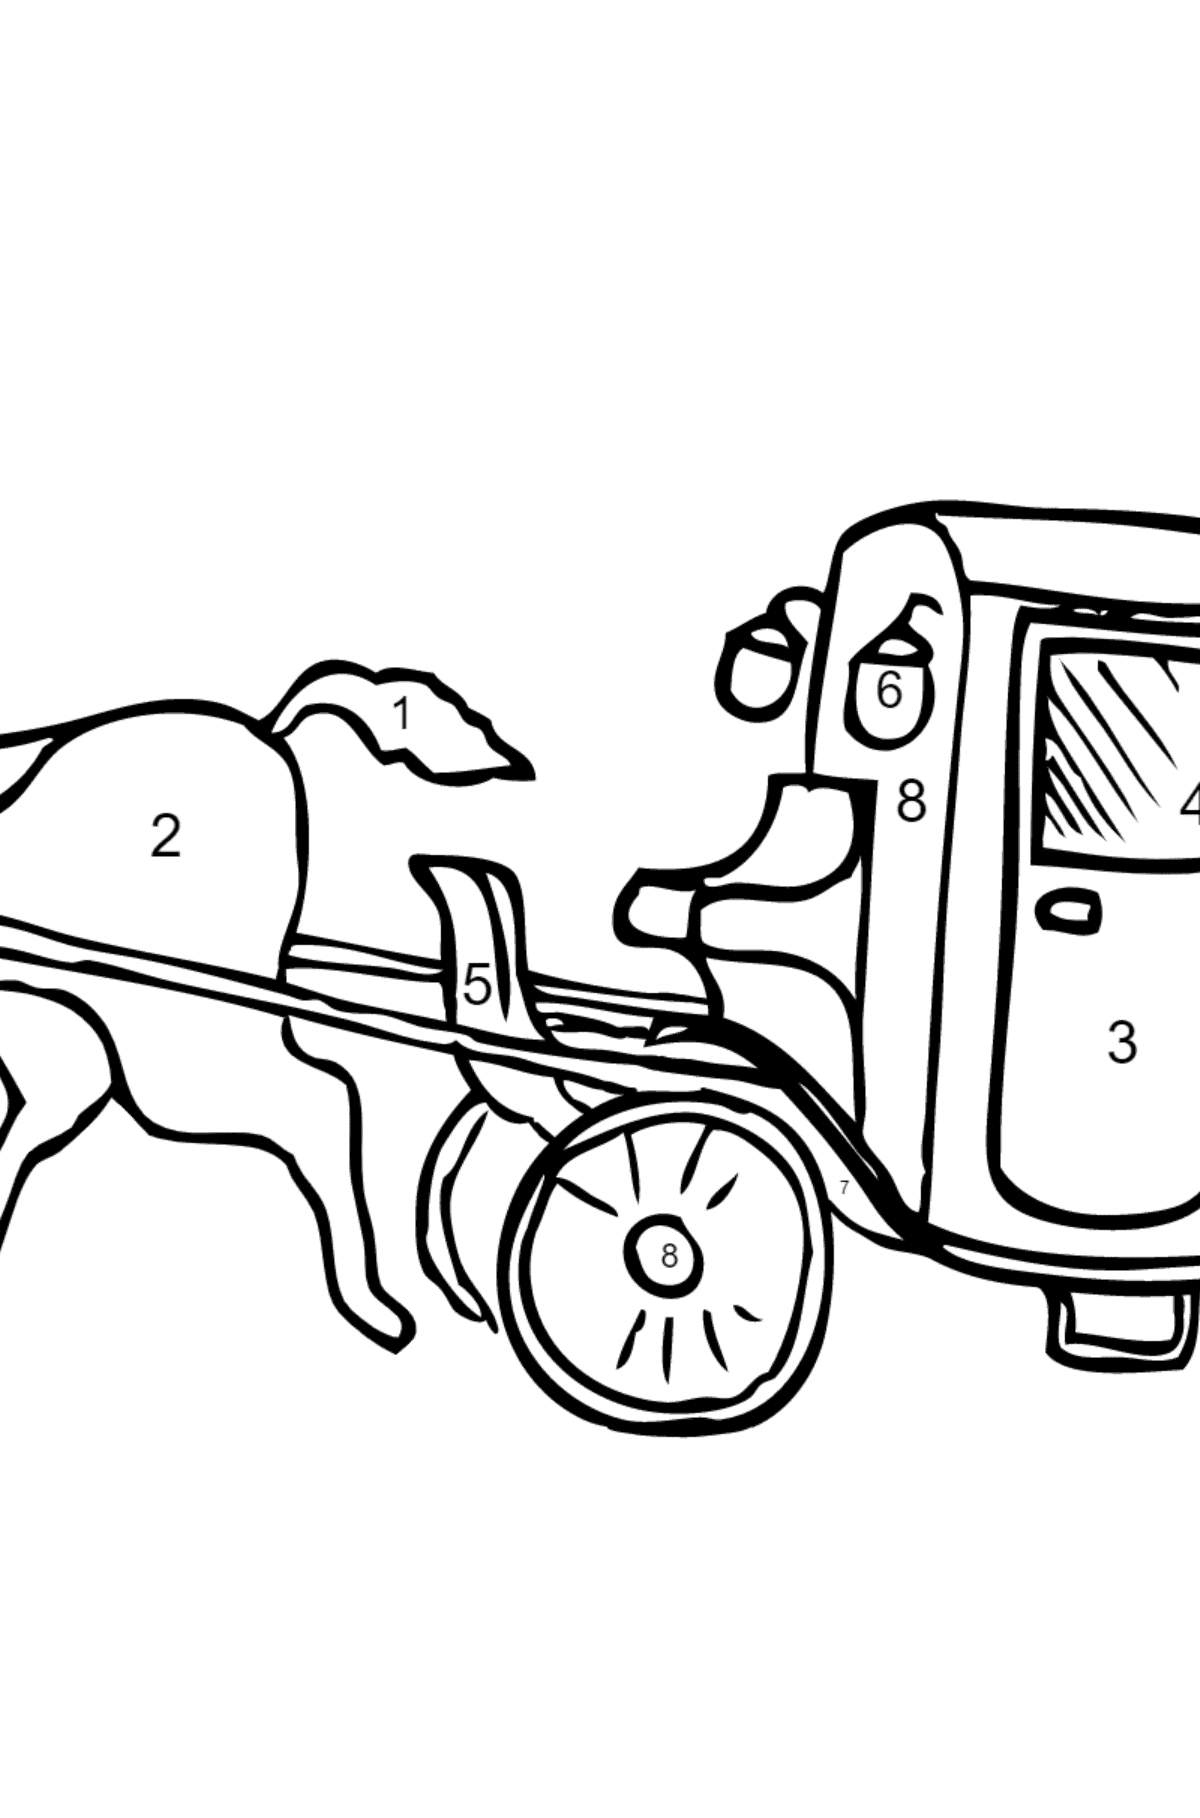 Coloring Page - A Cab - Coloring by Numbers for Kids